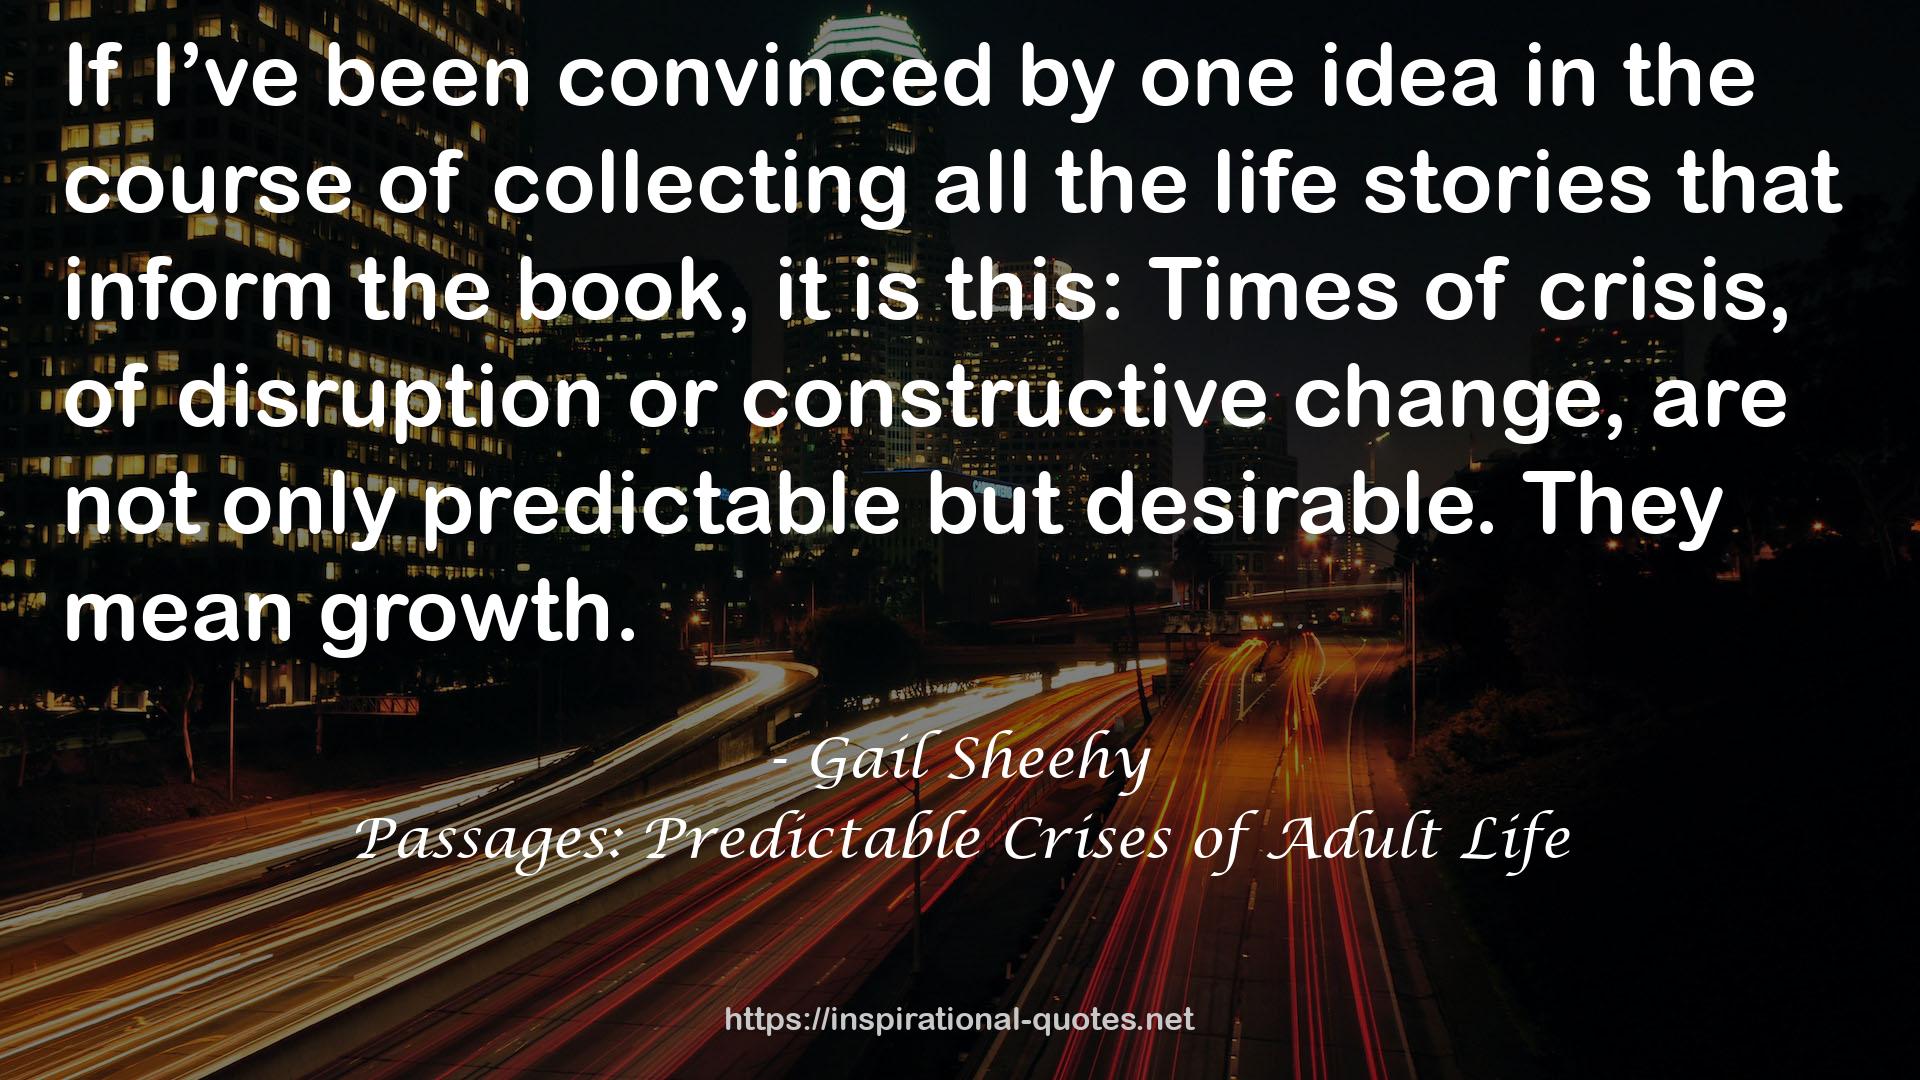 Passages: Predictable Crises of Adult Life QUOTES